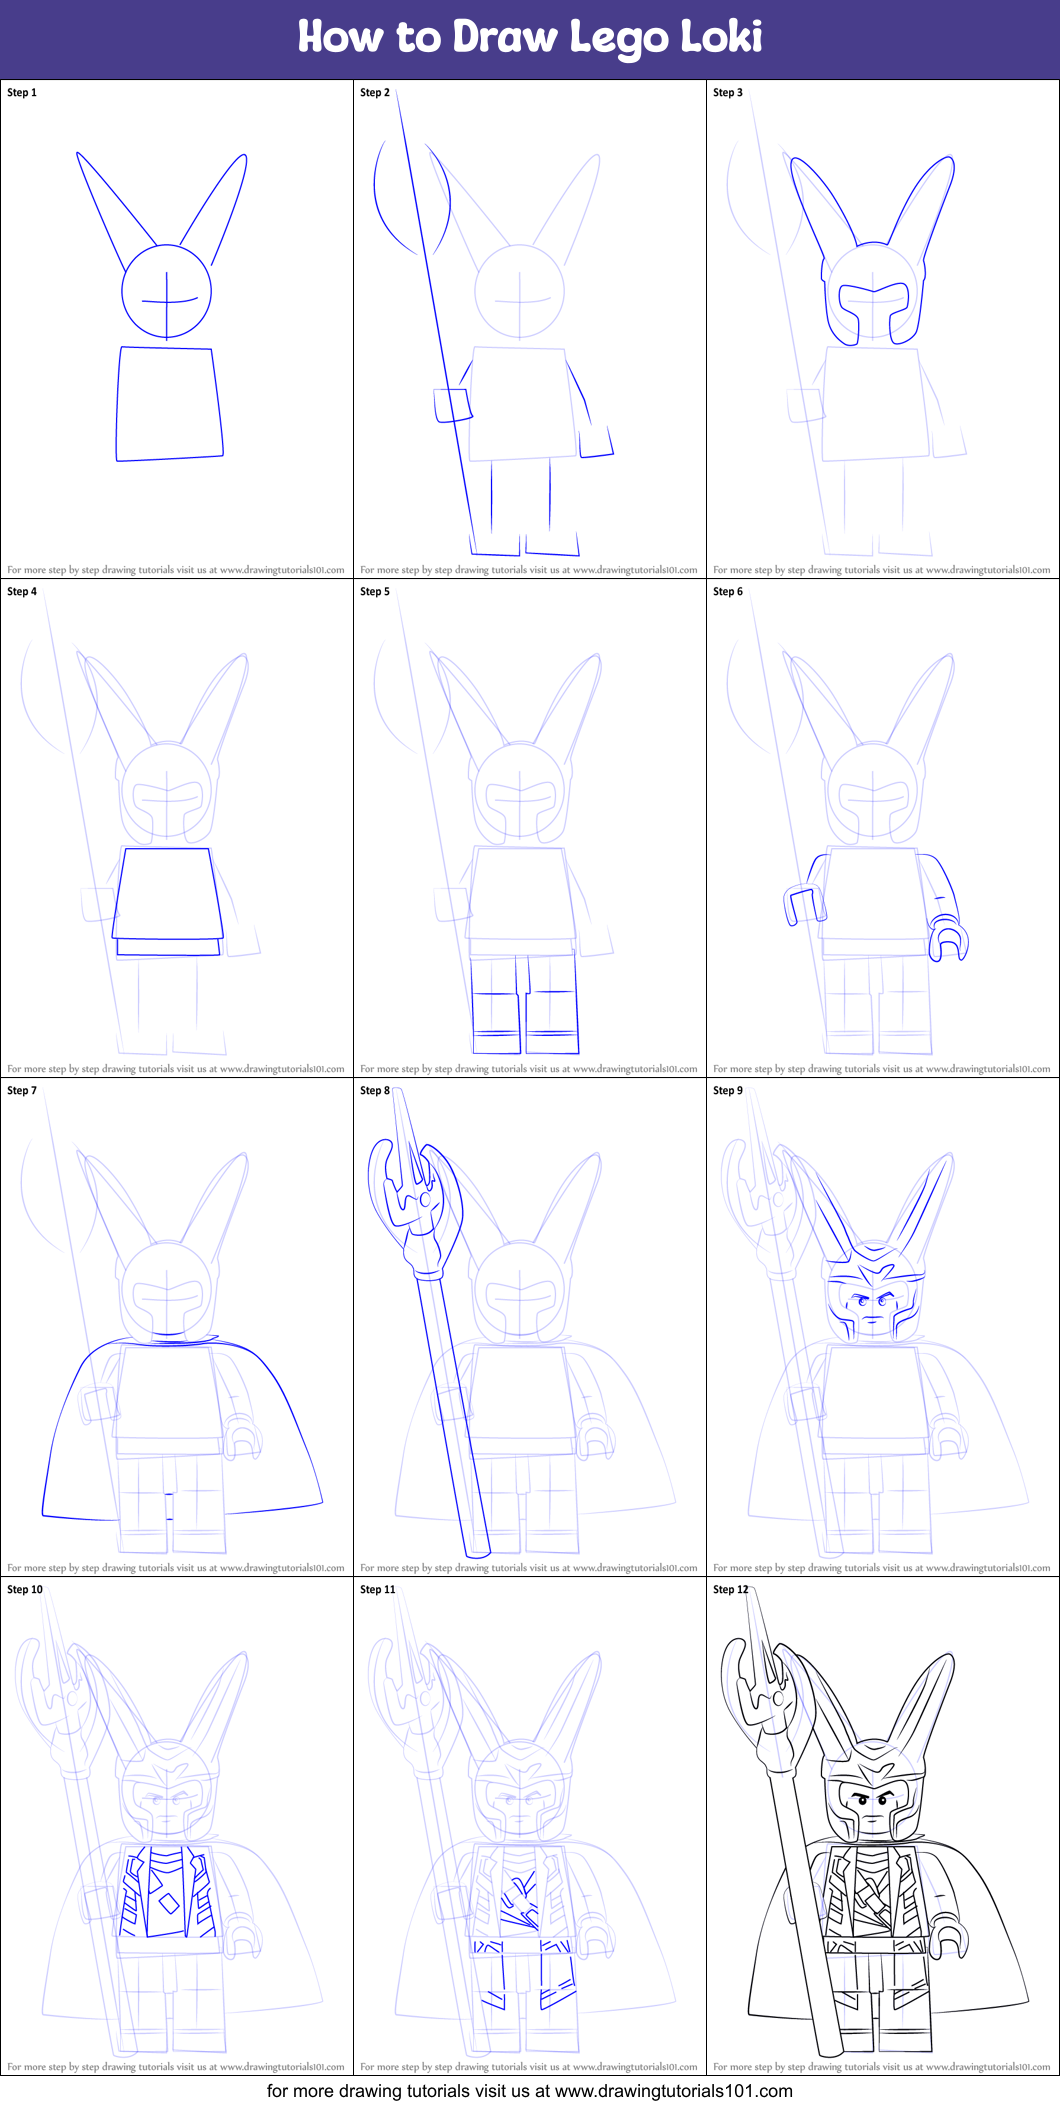 Download How to Draw Lego Loki printable step by step drawing sheet ...